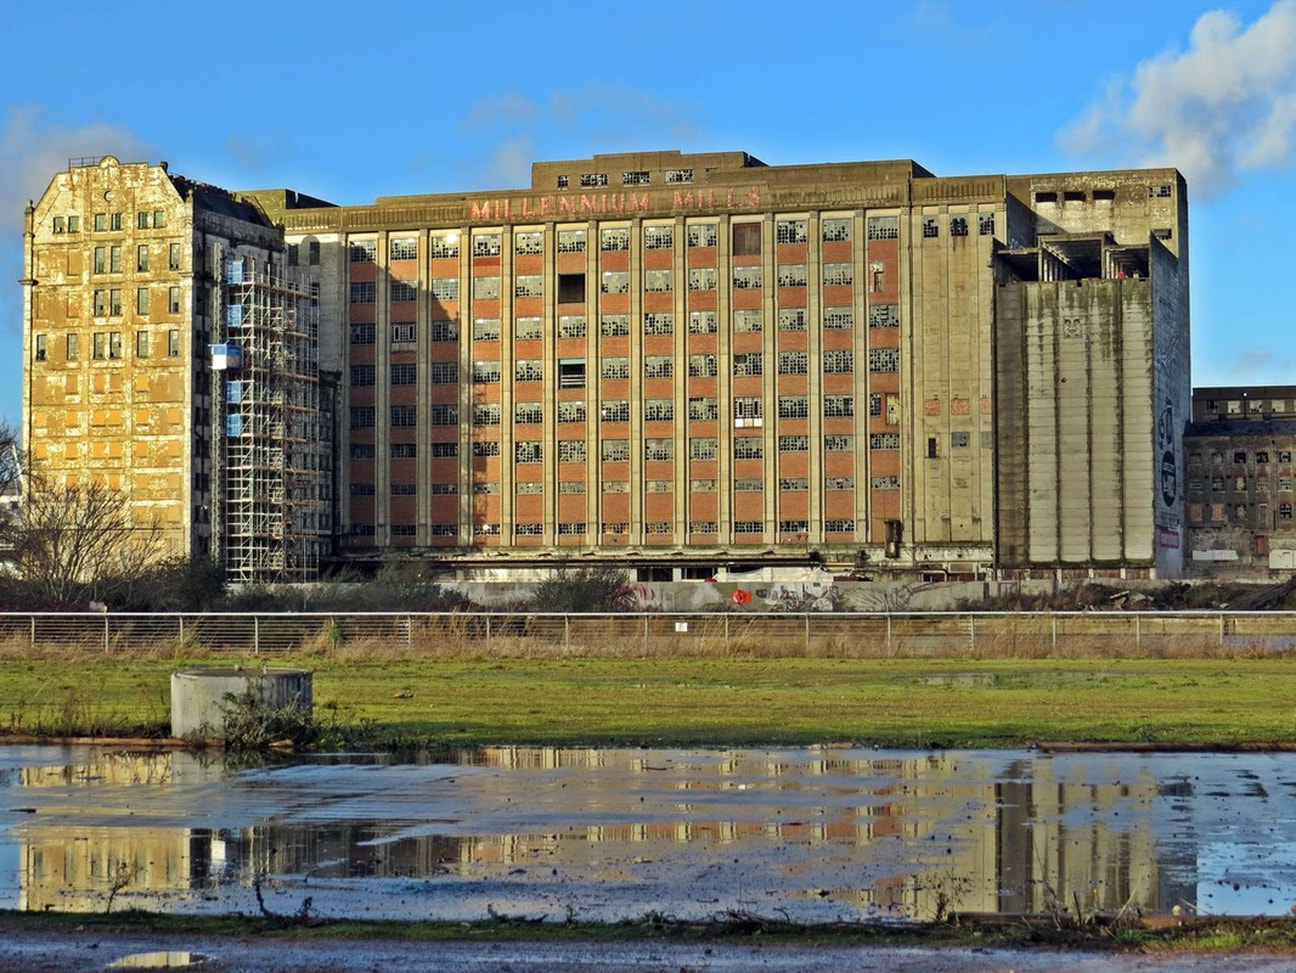 The long abandoned but soon to be redeveloped Millennium Mills by the Royal Docks in Newham, E16